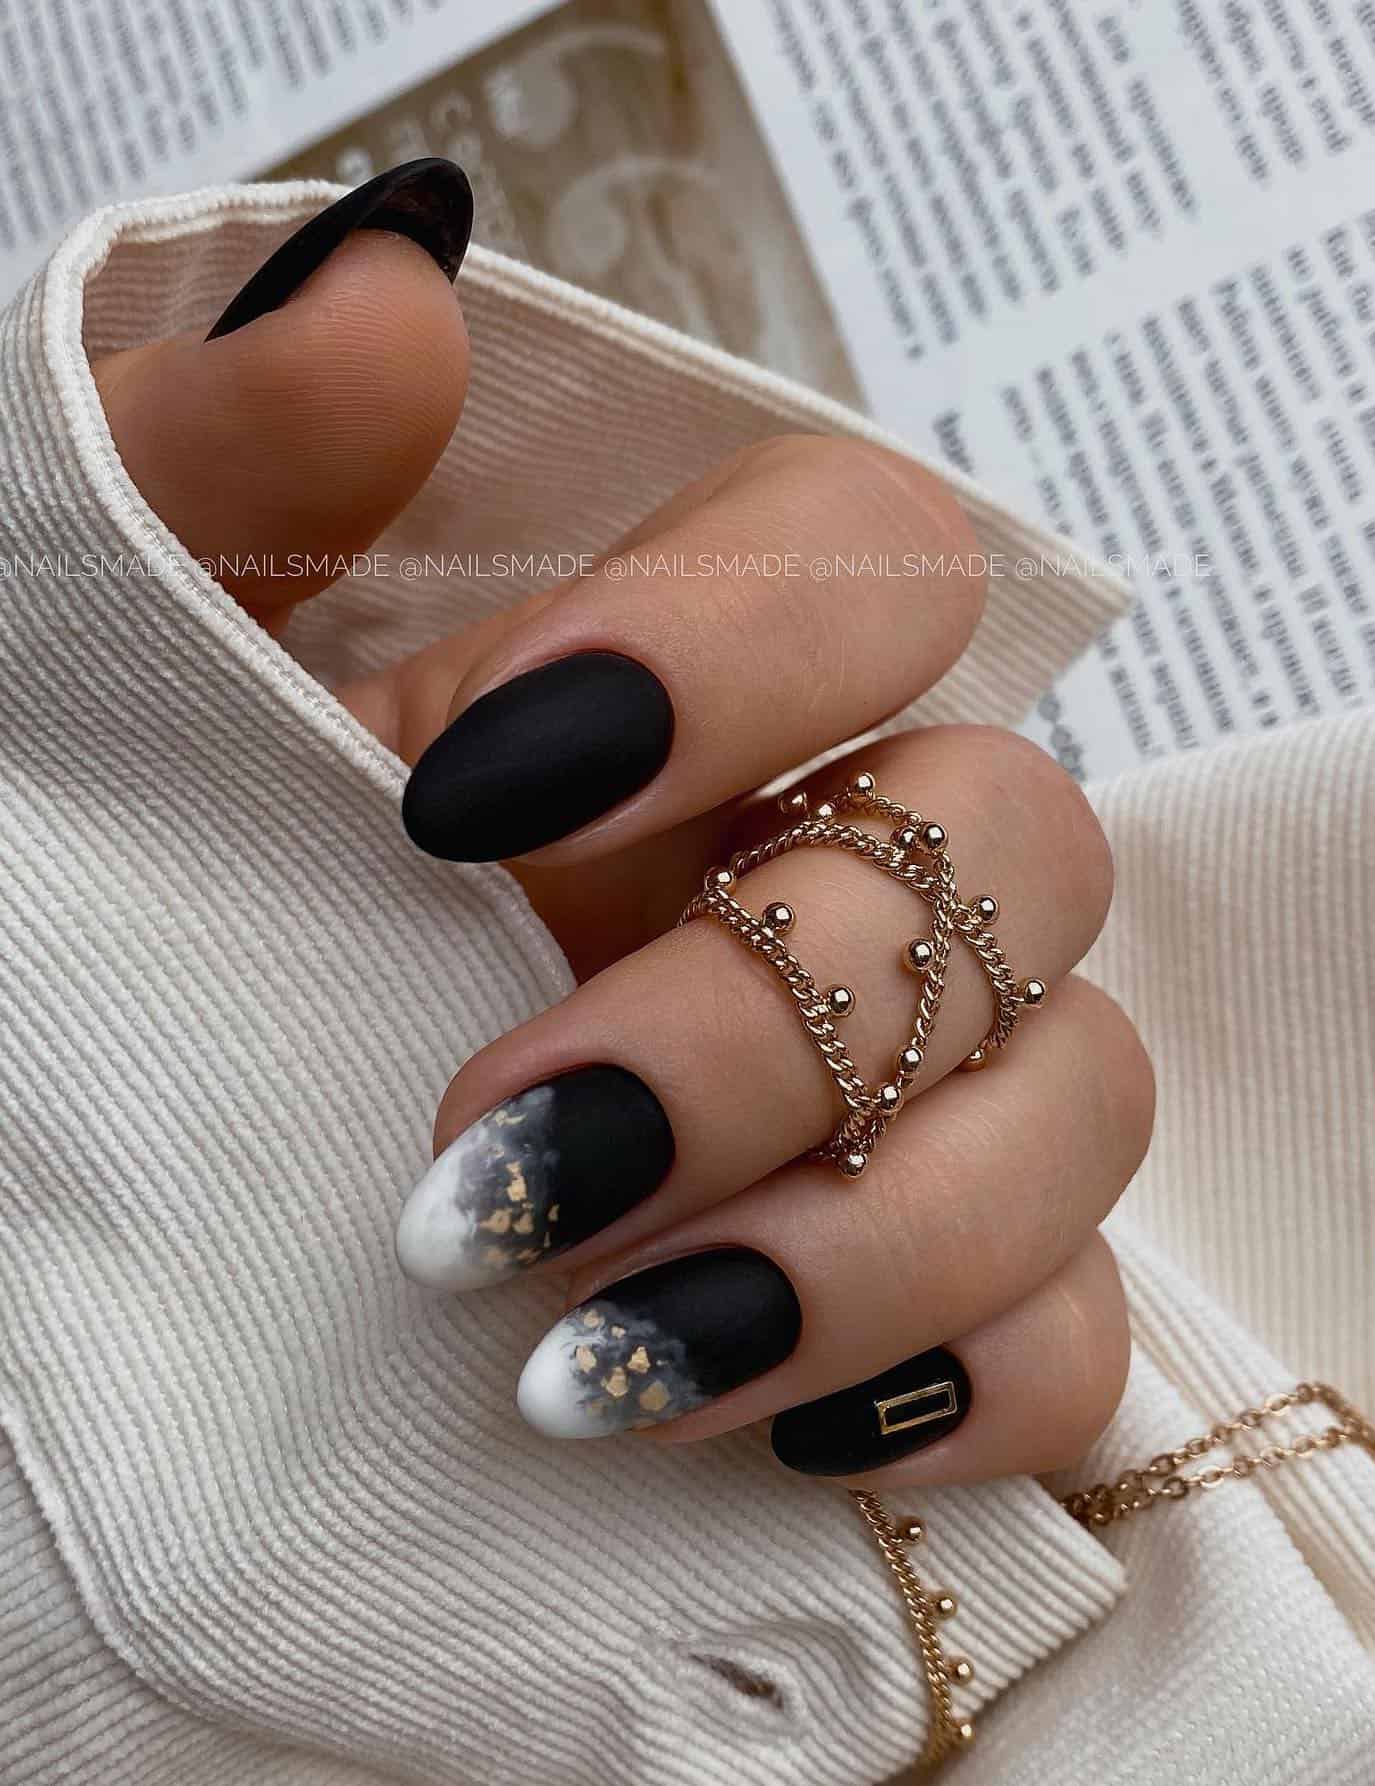 Short matte black almond nails with white and black ombre accent nails and gold flakes